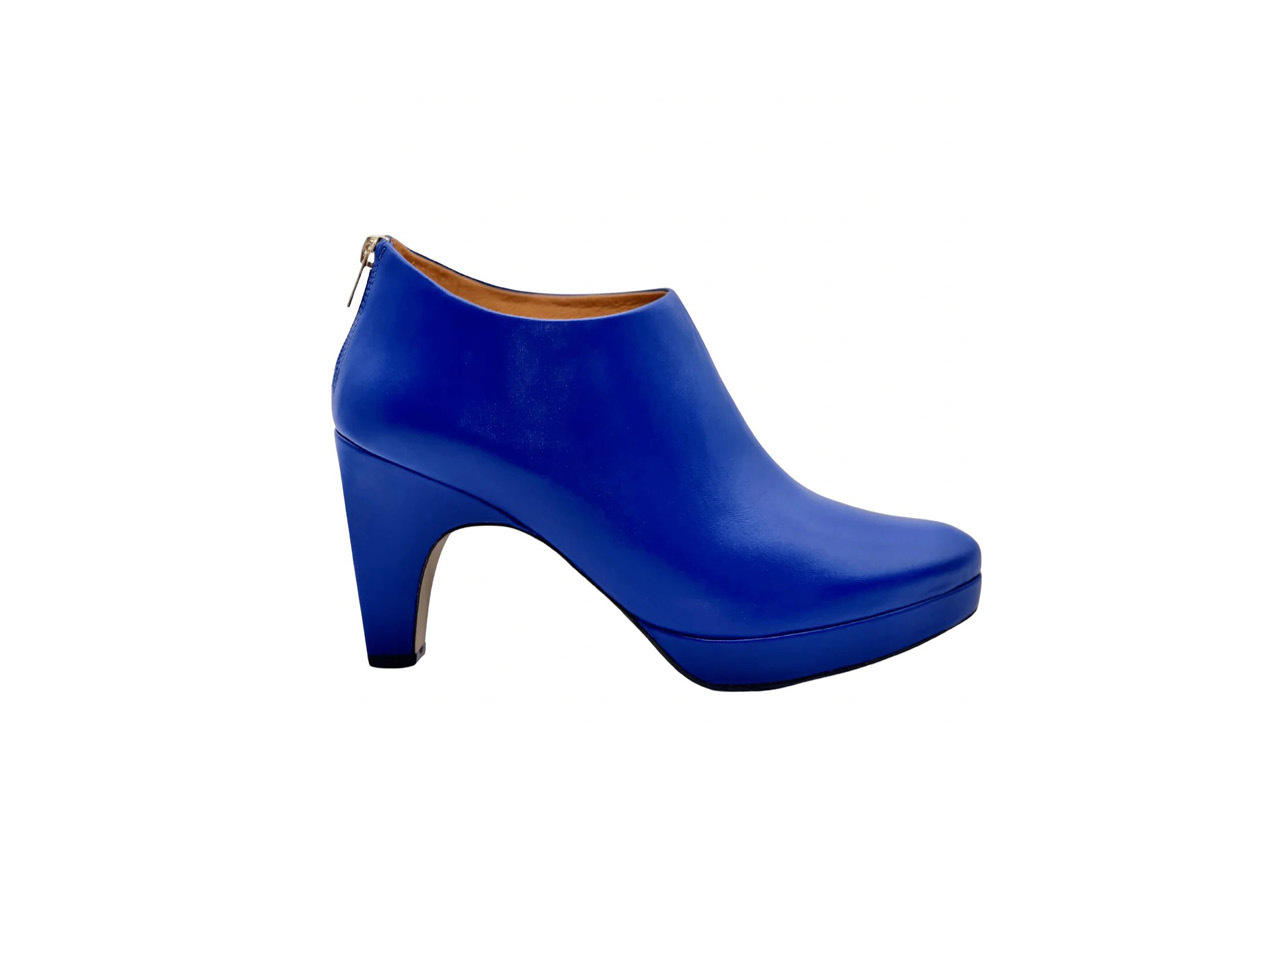 A blue Dr. LIza Shoes bootie that is part of the best Black Friday Sales.